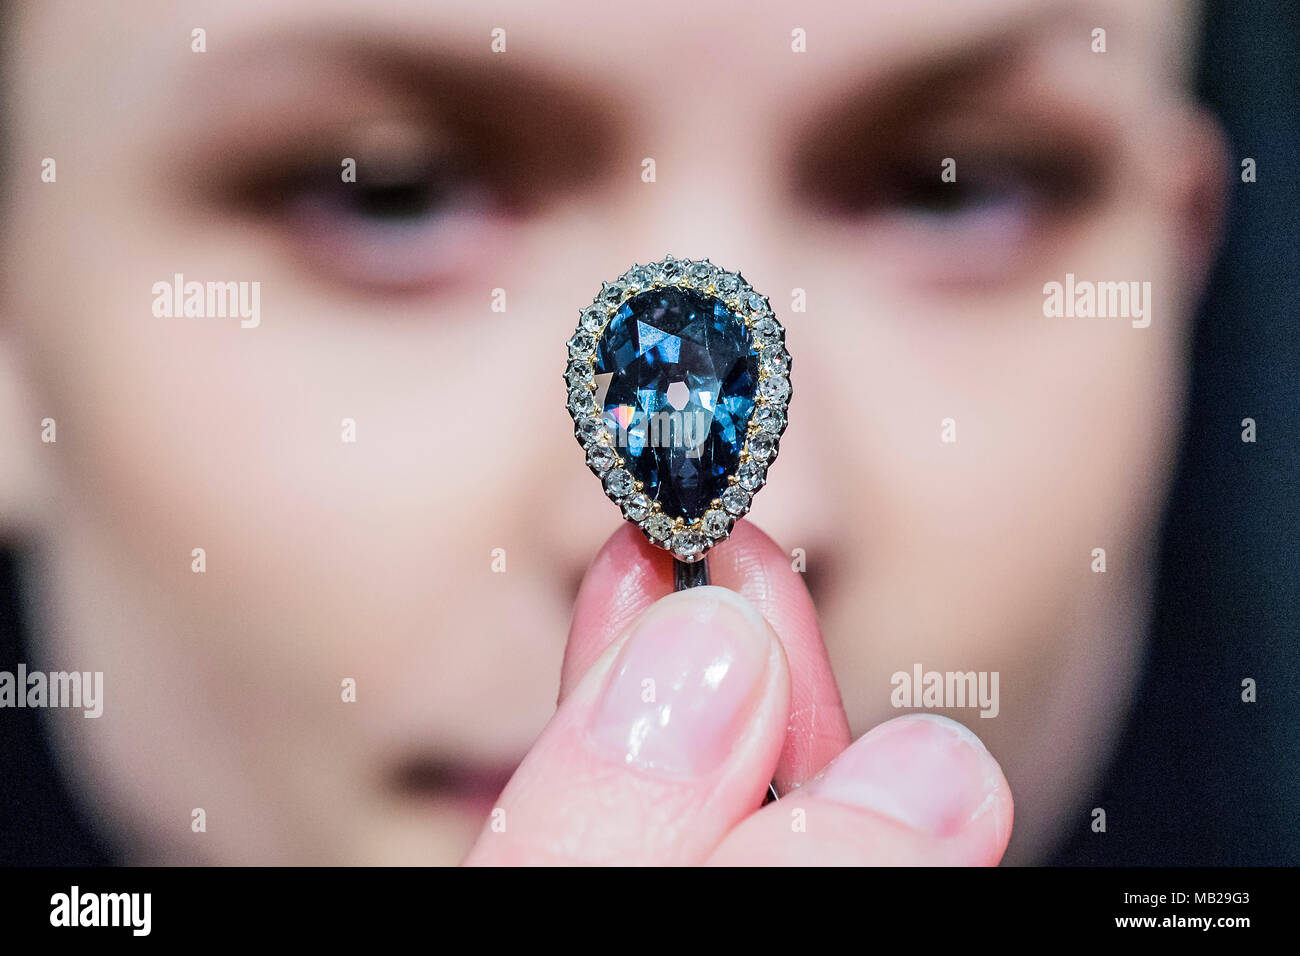 London, UK. 6th Apr, 2018. The Farnese Blue – will appear on the market for the first time in history this spring, after having remained in the same family for over three centuries. Given to Elisabeth Farnese, Queen of Spain (1692-1766). The 6.16-carat pear shaped blue diamond has an estimate of CHF 3.5 - 5 million (US$ 3.7 - 5.3 million) - Diamonds to be offered in Sotheby’s Geneva sale of Magnificent Jewels and Noble Jewels on 15 May. on display at Sotheby’s New Bond Street, London. Credit: Guy Bell/Alamy Live News Stock Photo